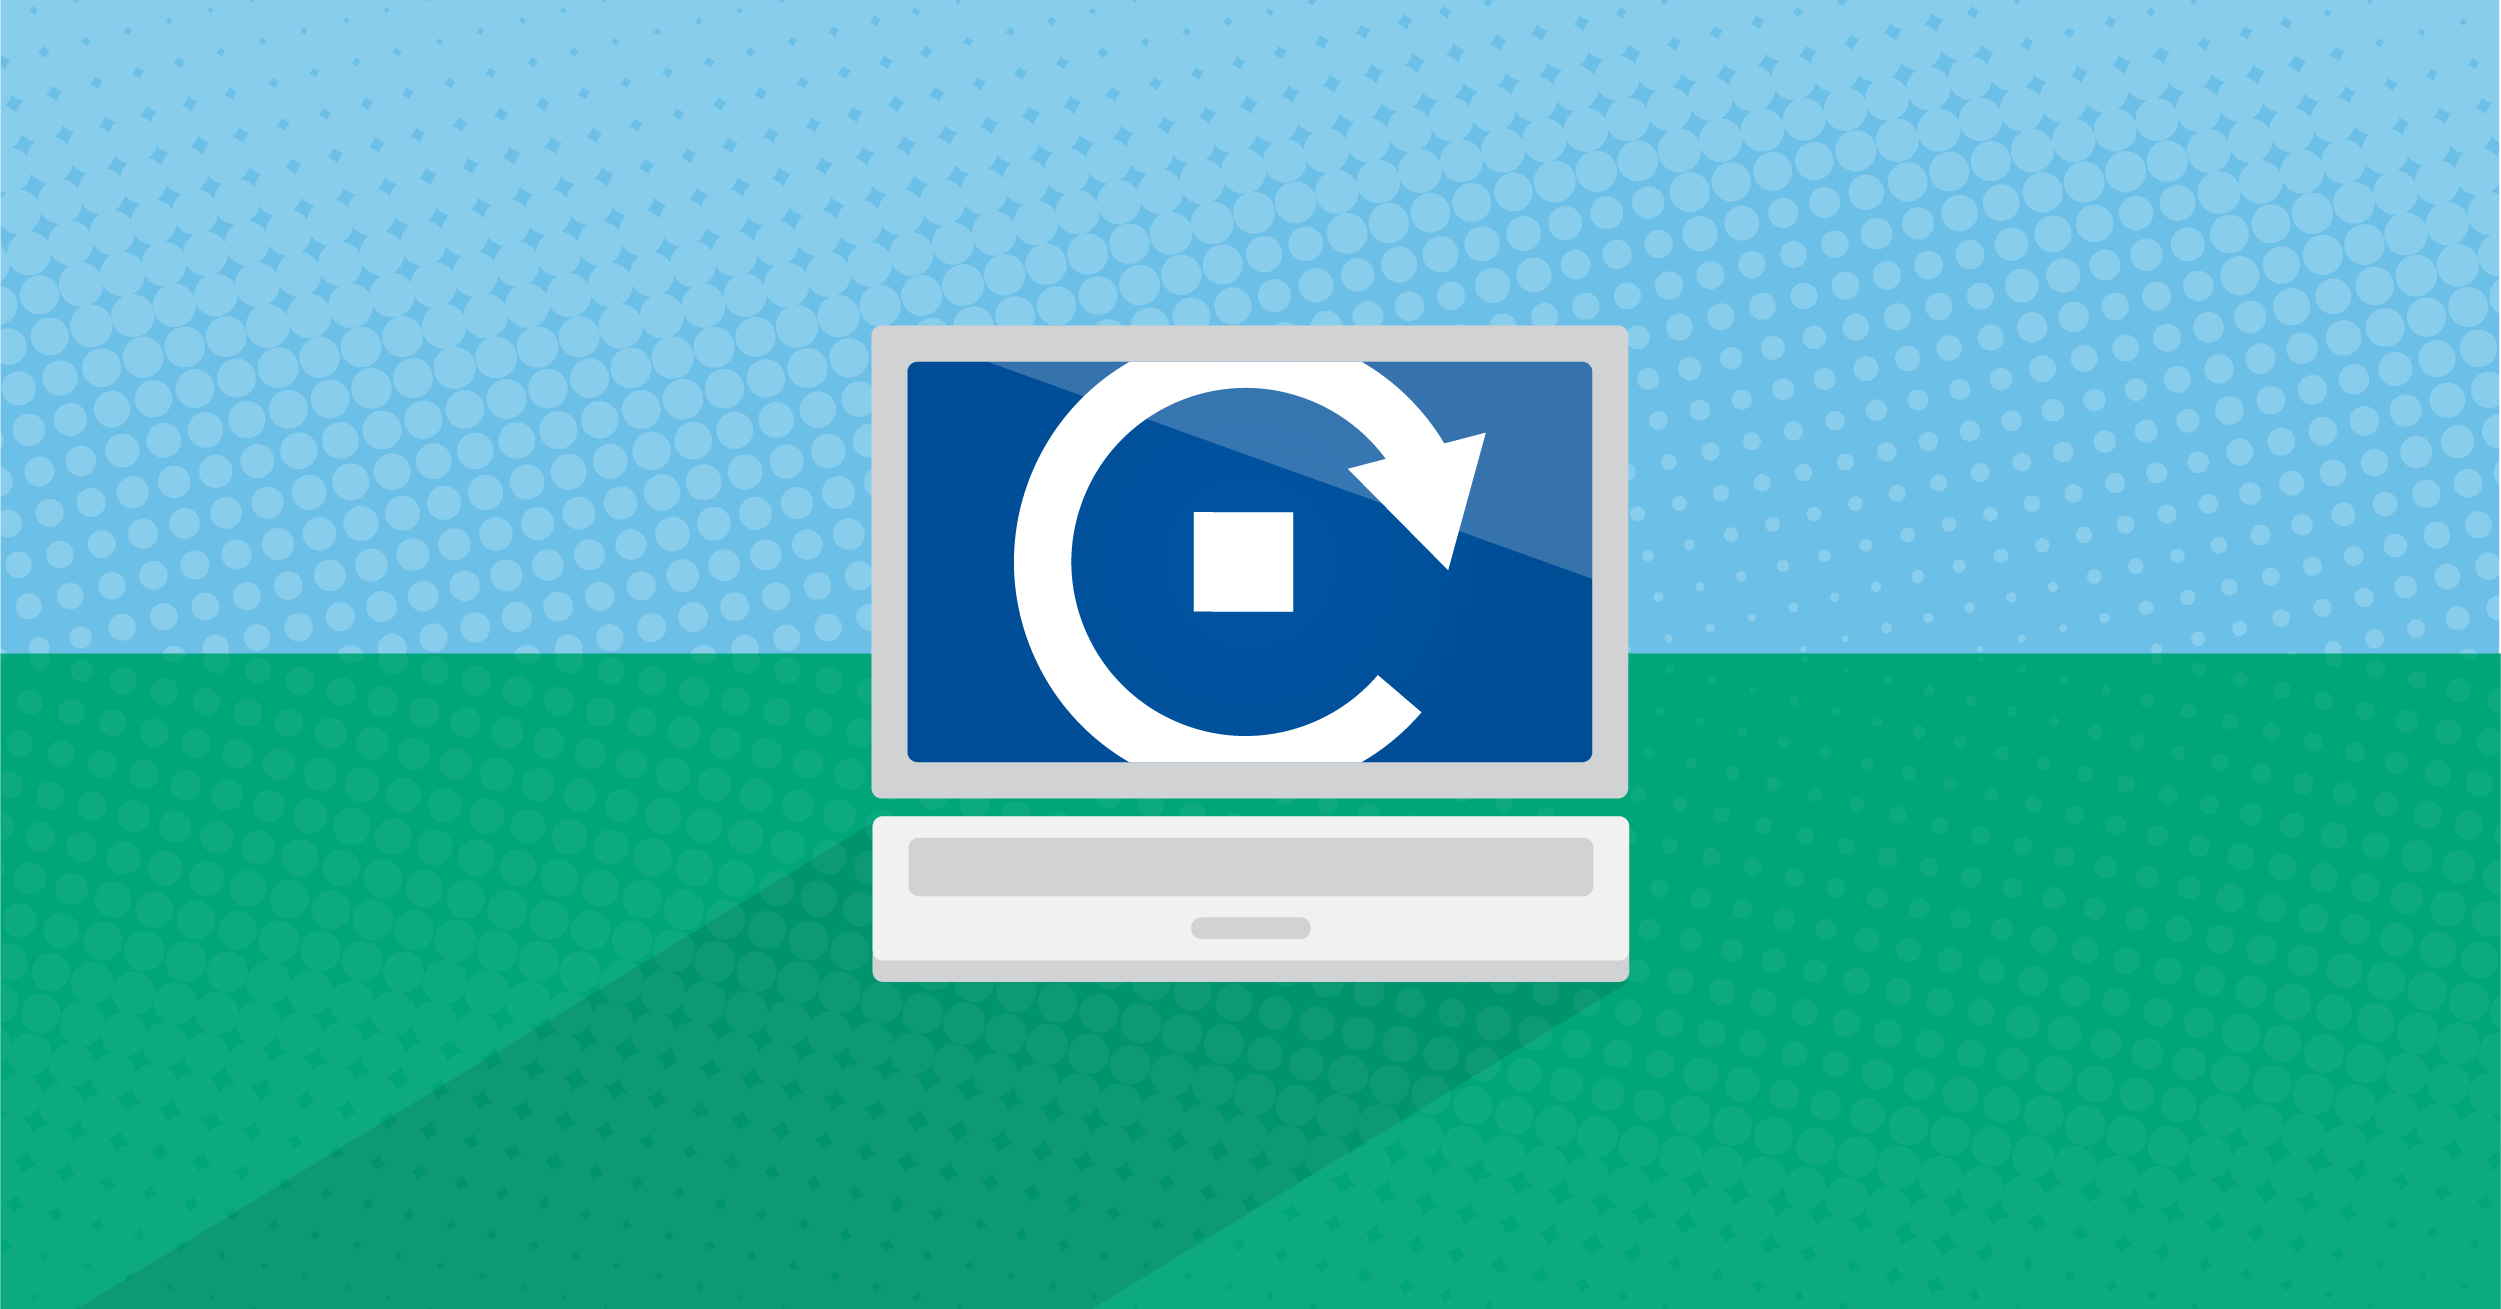 Illustration of computer with a refresh symbol on it stylized to look like the Pace logo.